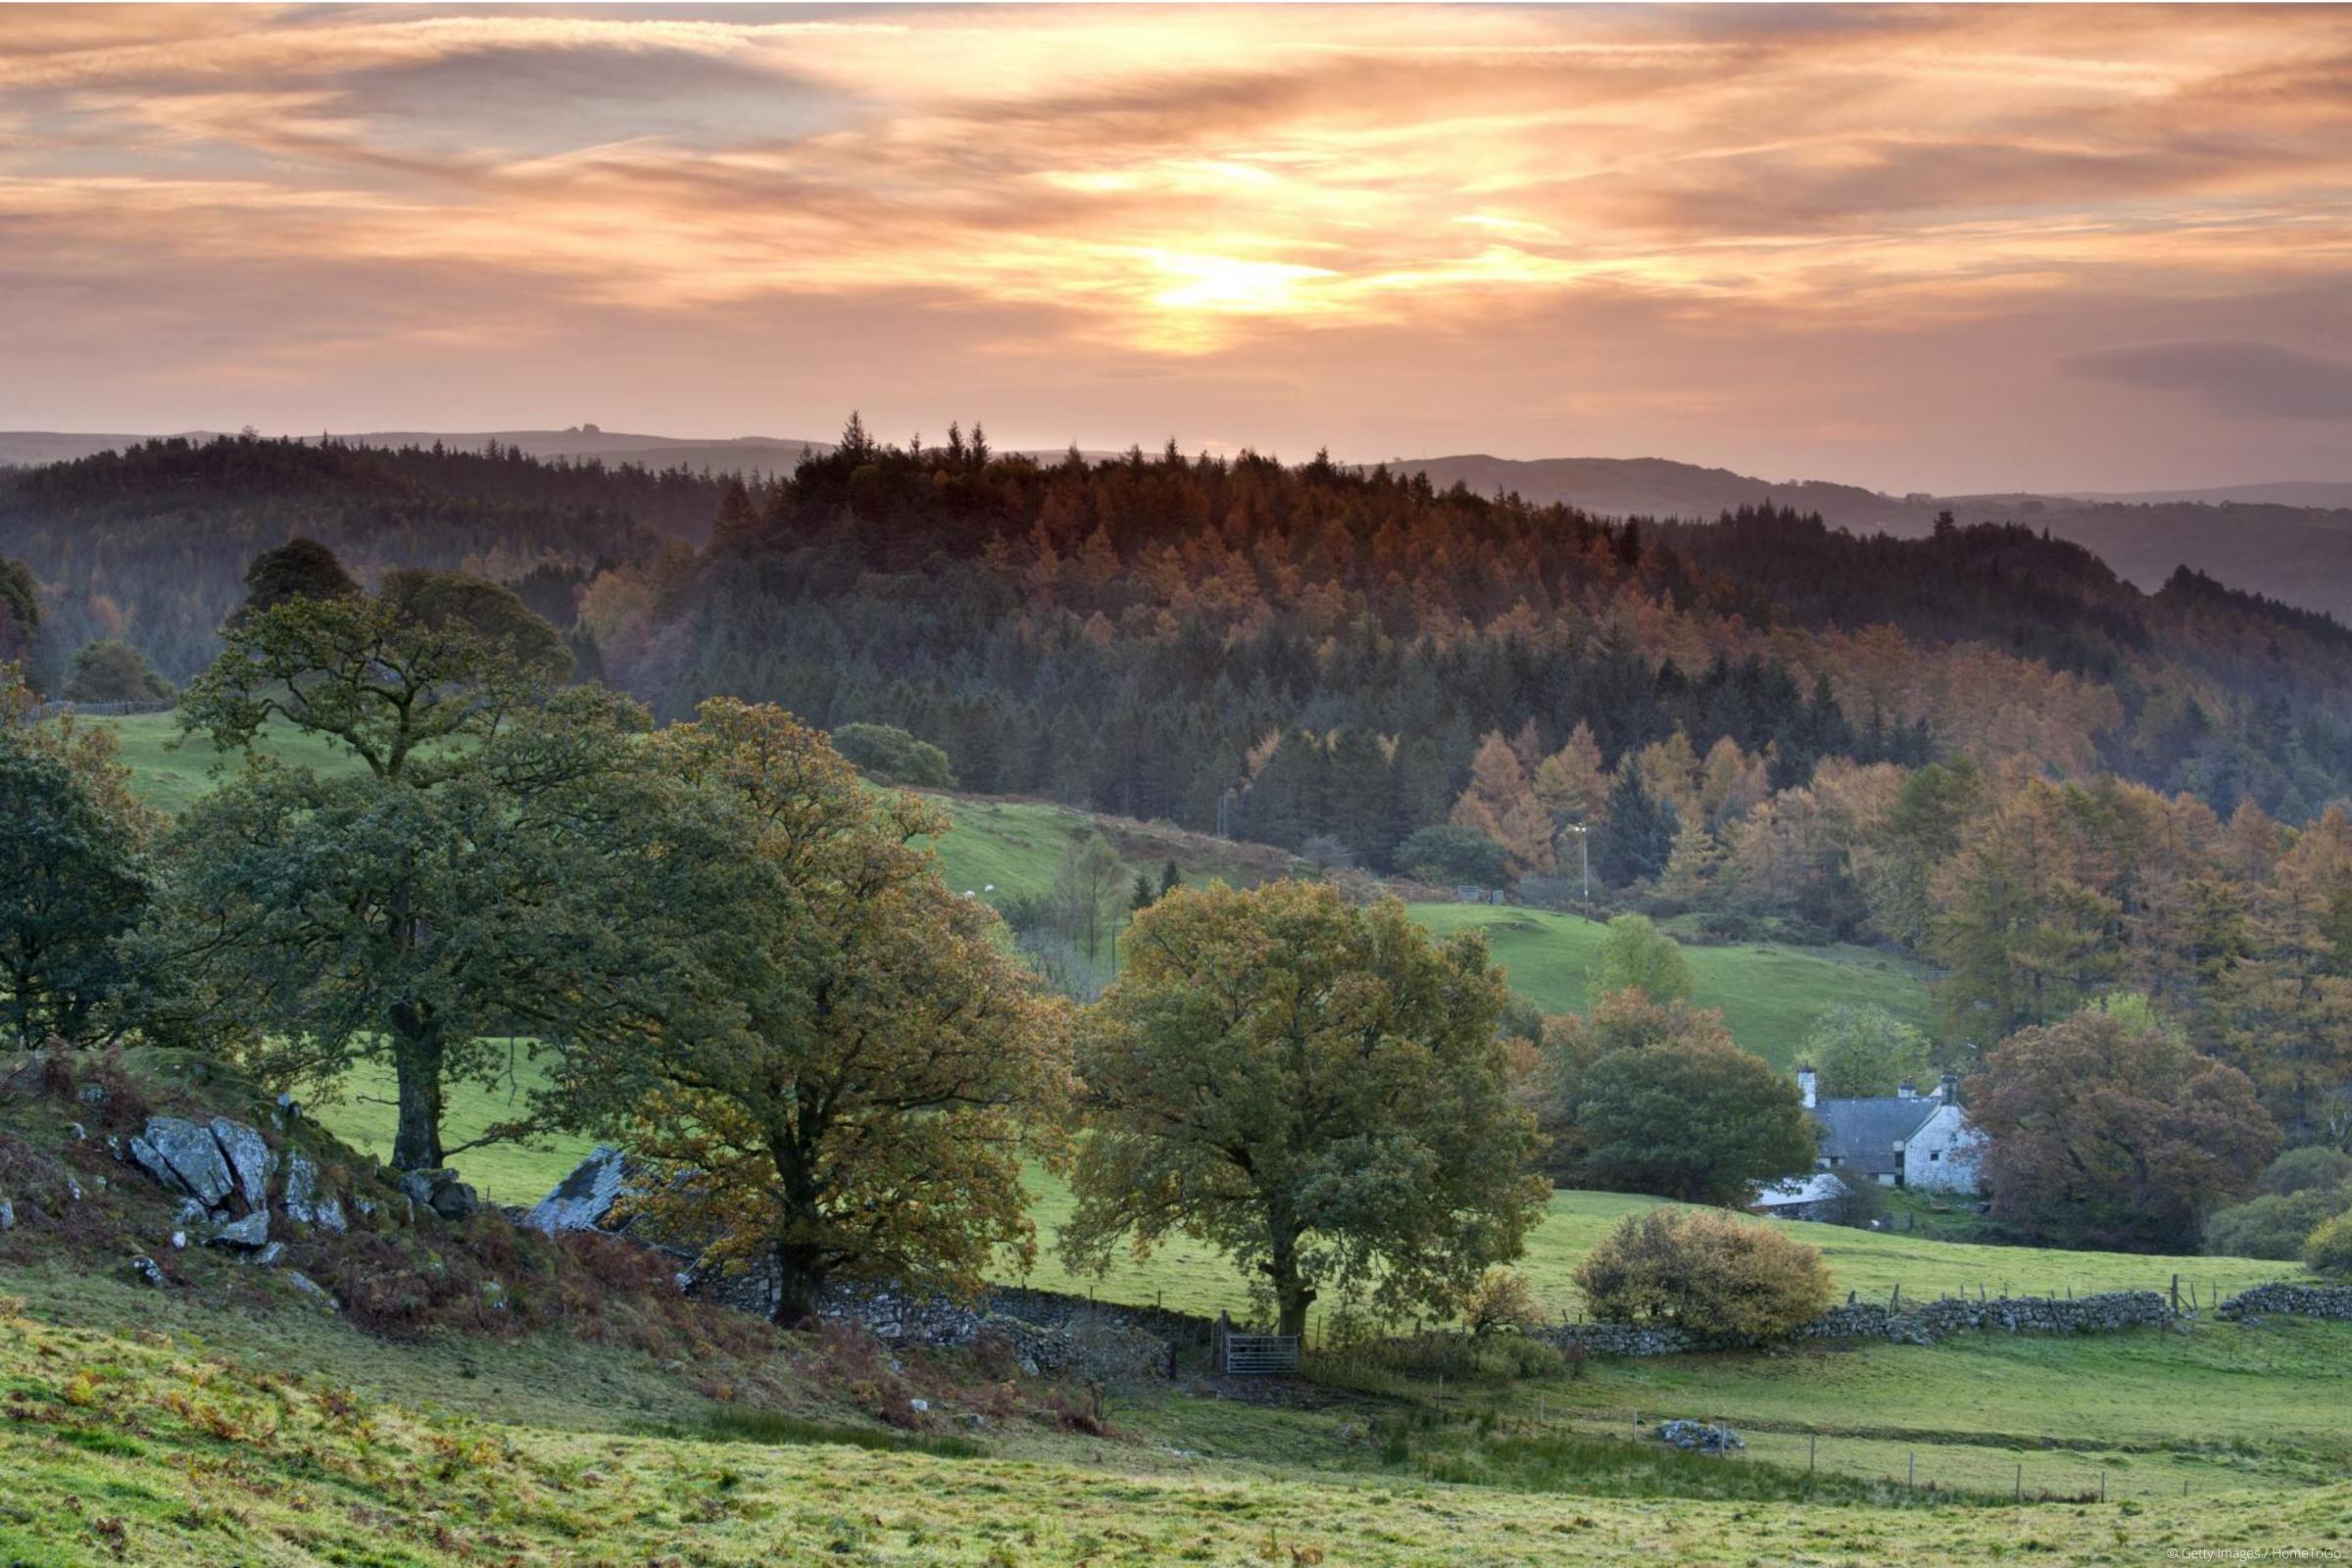 Clocaenog and Gwydir forests named top in the UK. Image: Getty Images